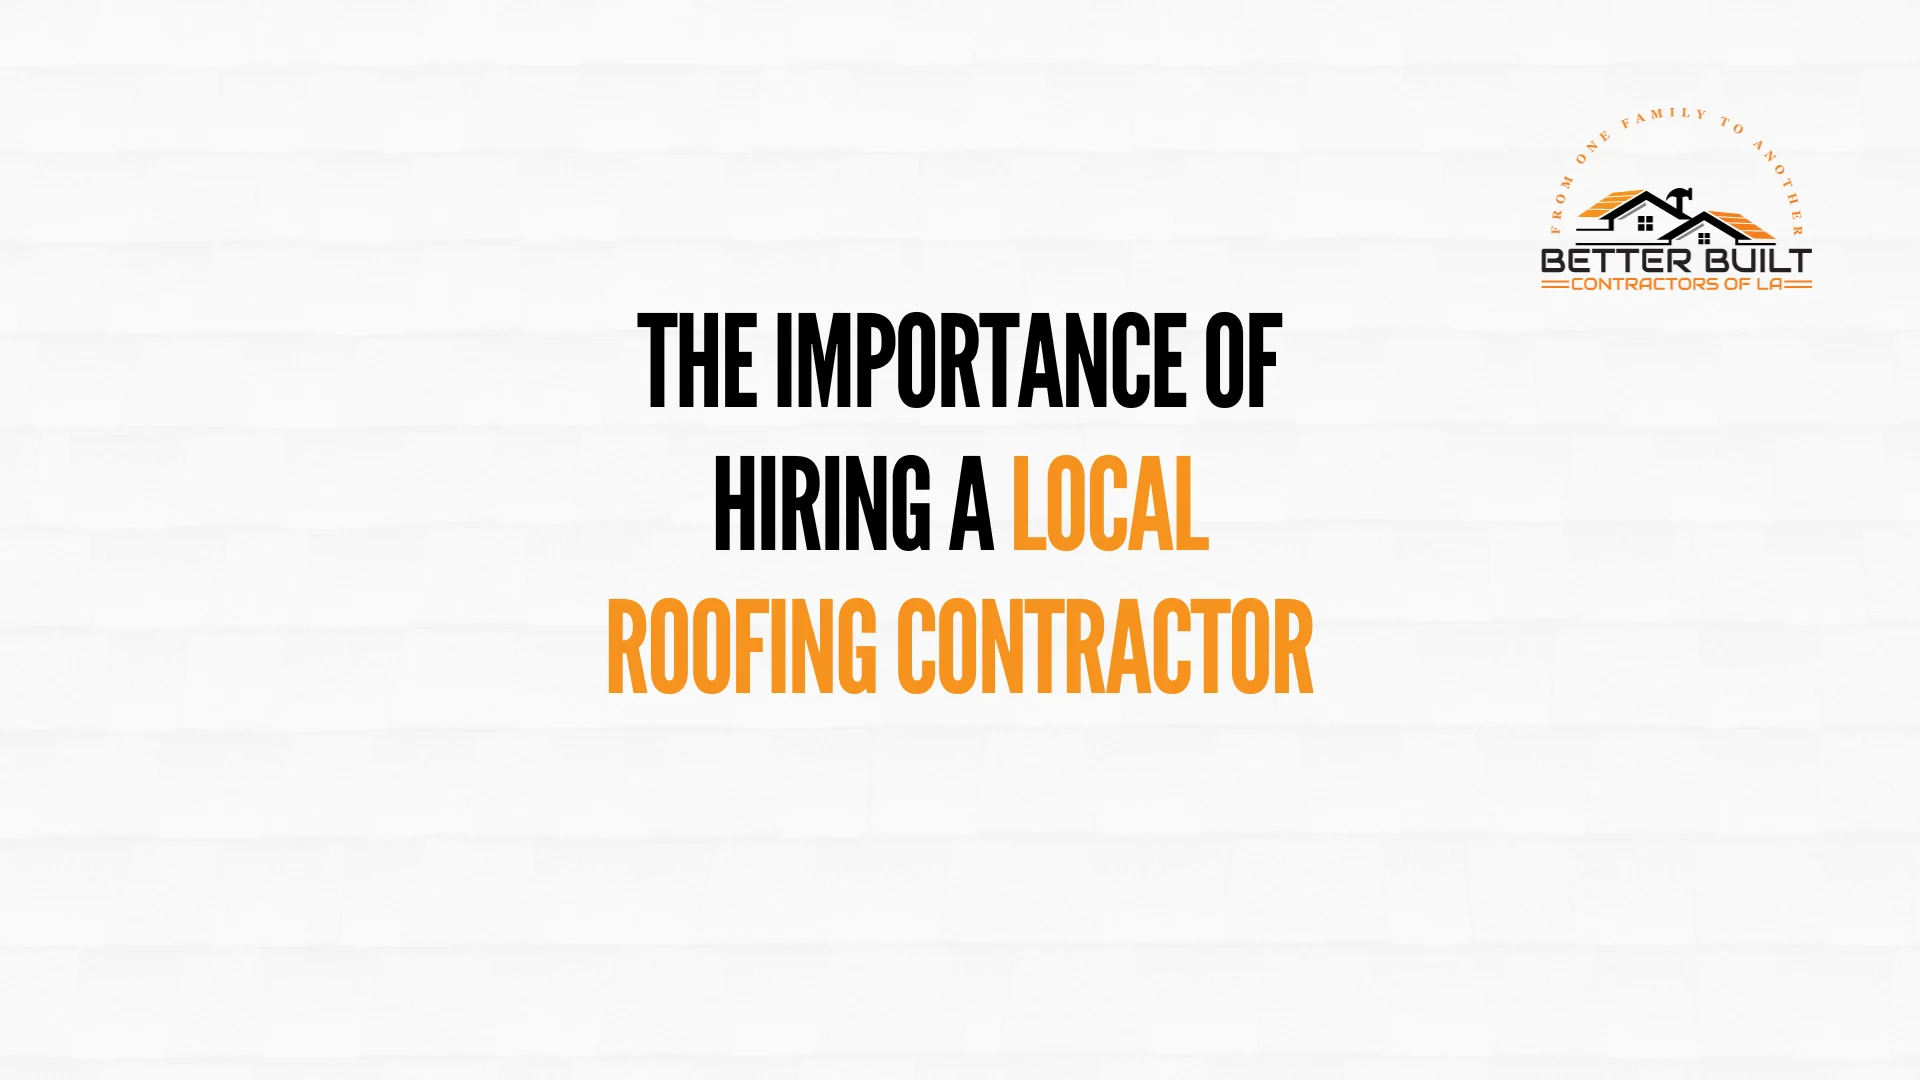 The Importance of Hiring a Local Roofing Contractor